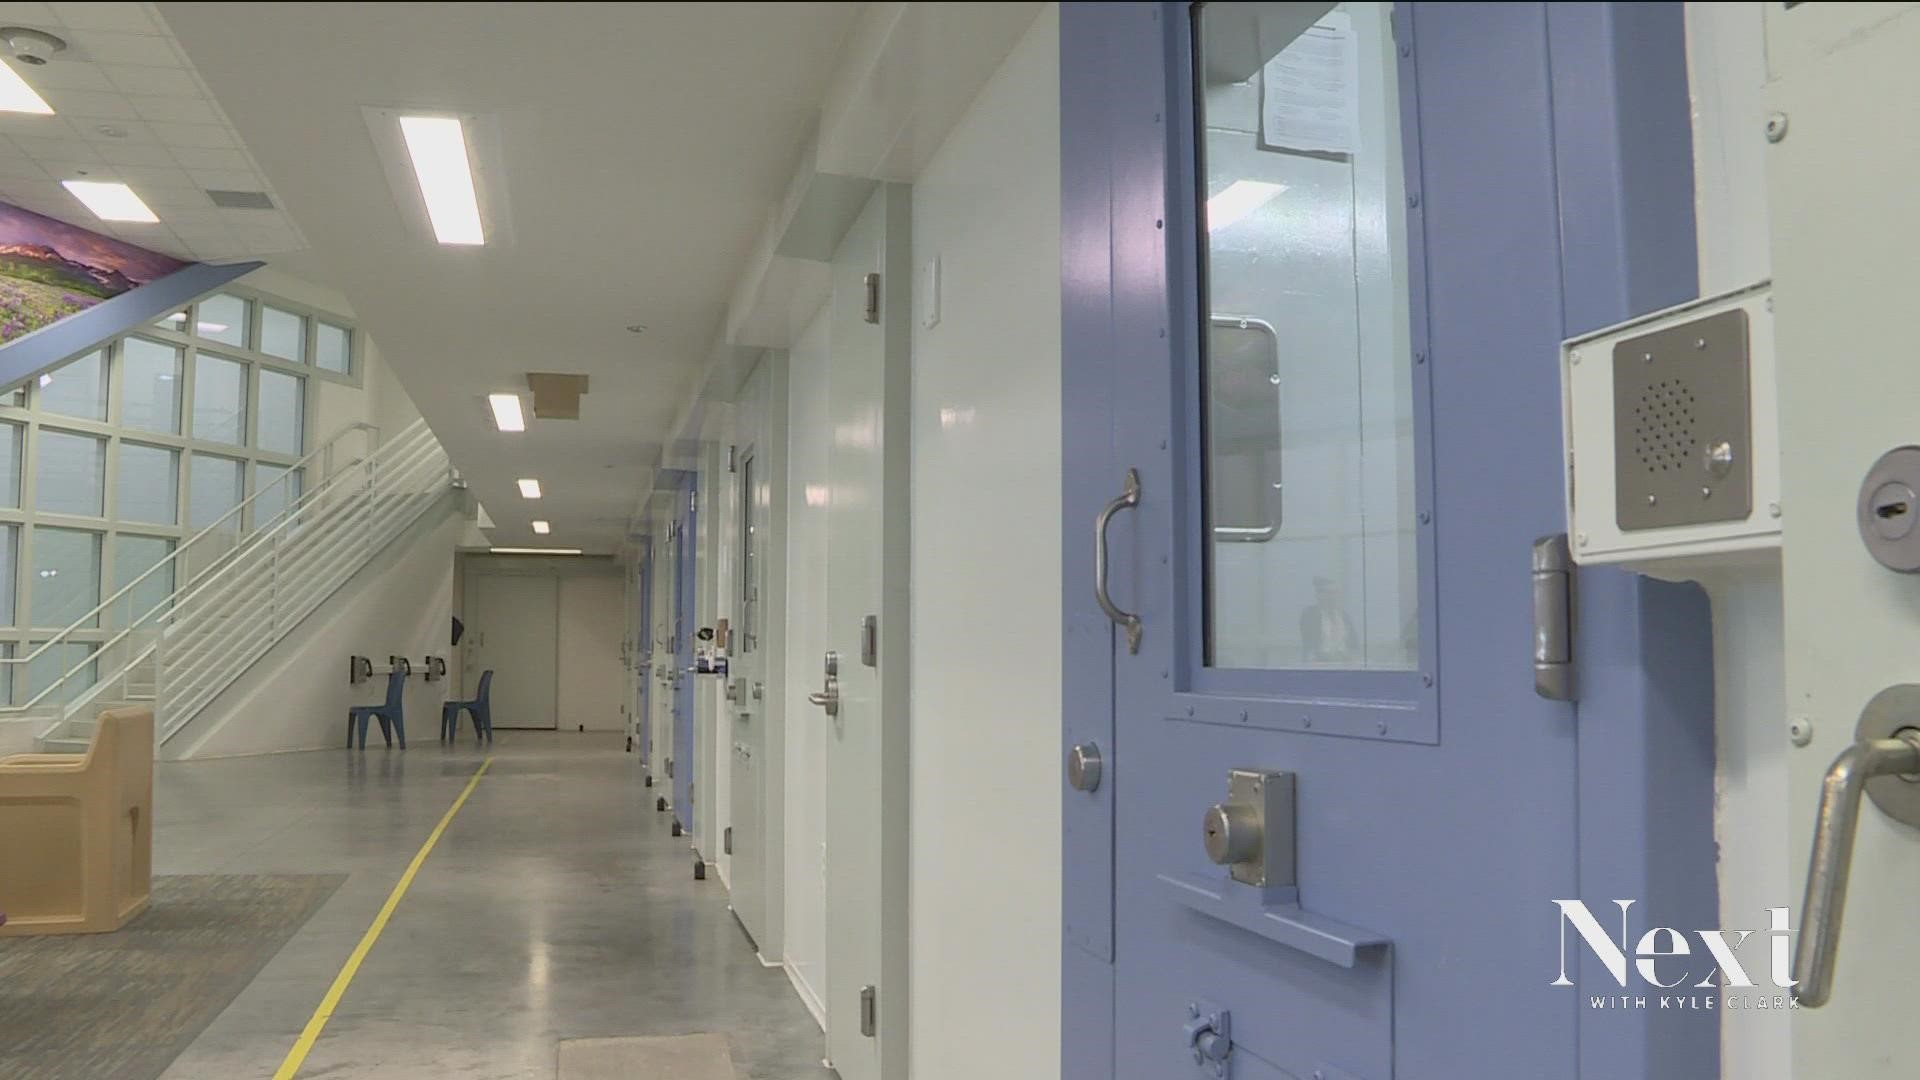 The Denver sheriff's office spent millions of dollars to renovate the jail, specifically the area women are housed. They're hoping to see community impacts.